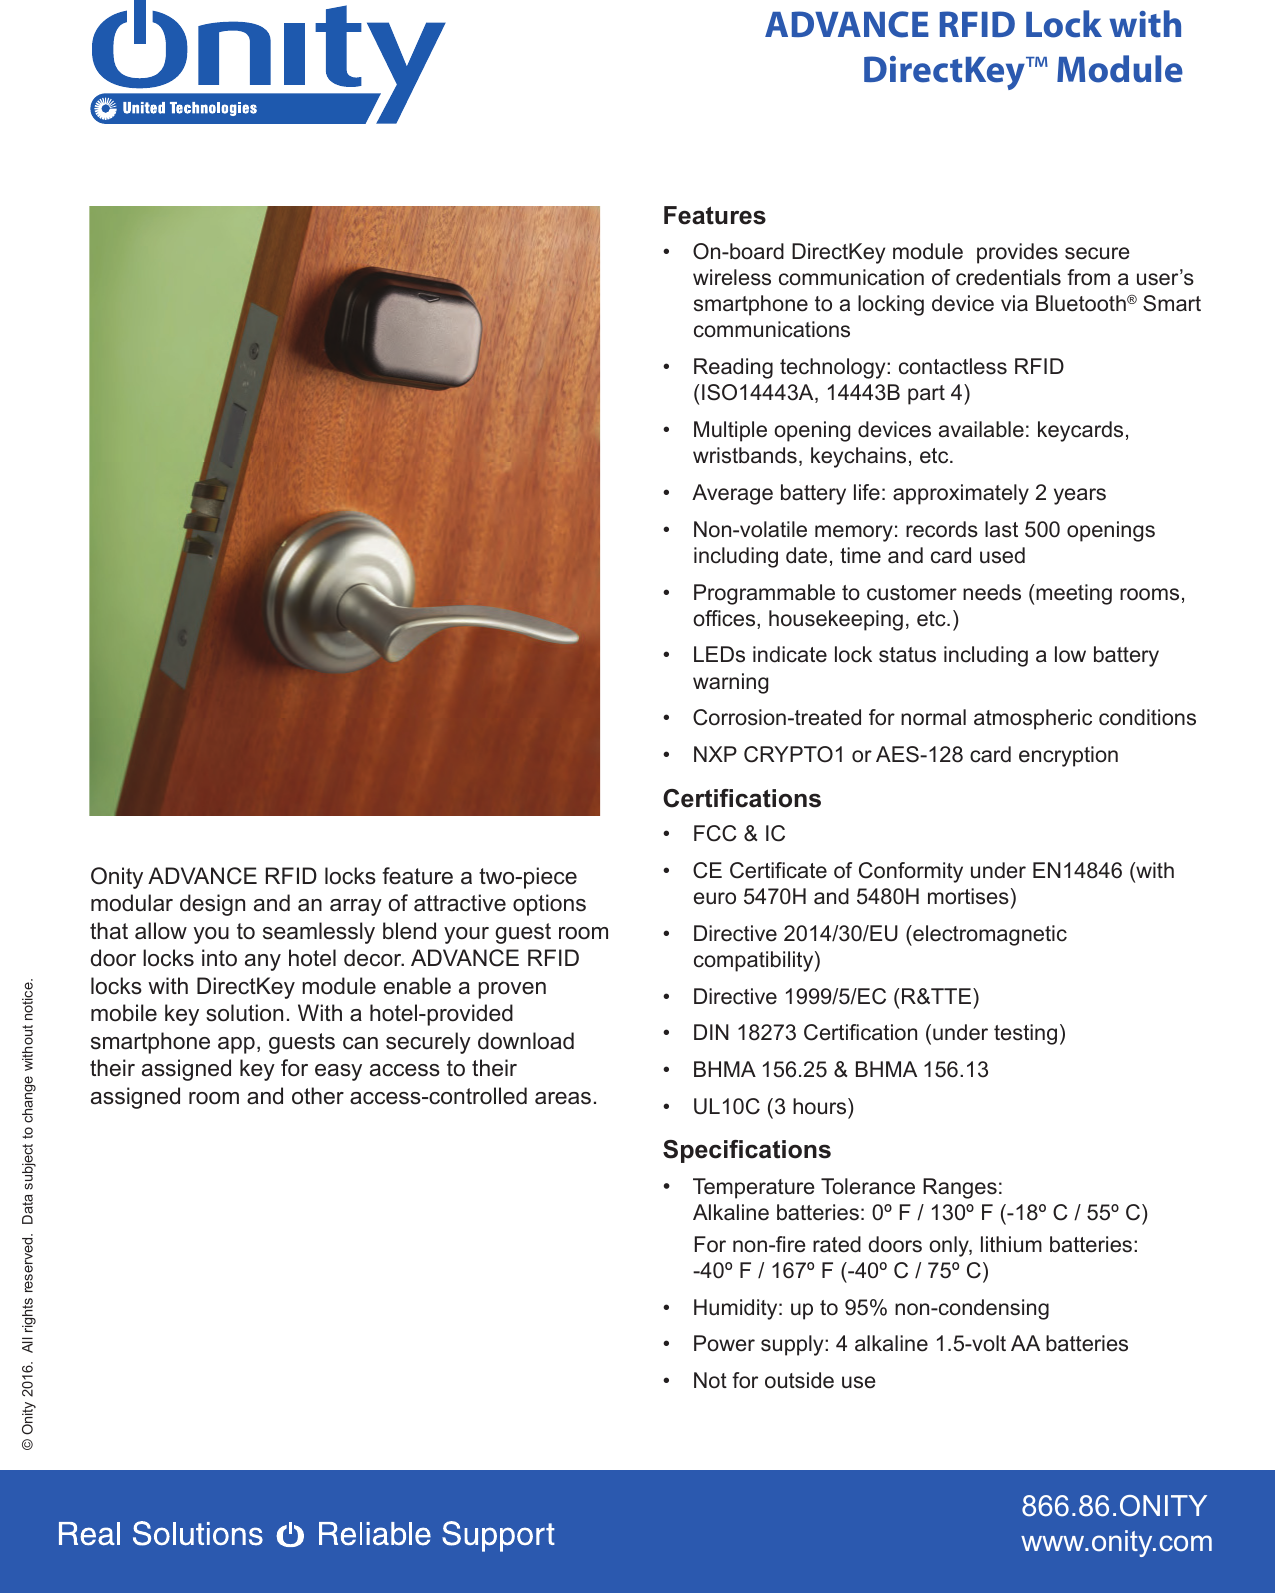 866.86.ONITYwww.onity.com© Onity 2016.  All rights reserved.  Data subject to change without notice.ADVANCE RFID Lock with DirectKey™ ModuleOnity ADVANCE RFID locks feature a two-piece modular design and an array of attractive options that allow you to seamlessly blend your guest room door locks into any hotel decor. ADVANCE RFID locks with DirectKey module enable a proven mobile key solution. With a hotel-provided smartphone app, guests can securely download their assigned key for easy access to their assigned room and other access-controlled areas.Features•  On-board DirectKey module  provides secure wireless communication of credentials from a user’s smartphone to a locking device via Bluetooth® Smart communications•  Reading technology: contactless RFID      (ISO14443A, 14443B part 4)•  Multiple opening devices available: keycards,    wristbands, keychains, etc.•  Average battery life: approximately 2 years•   Non-volatile memory: records last 500 openings including date, time and card used•   Programmable to customer needs (meeting rooms, offices, housekeeping, etc.)•   LEDs indicate lock status including a low battery warning•   Corrosion-treated for normal atmospheric conditions•   NXP CRYPTO1 or AES-128 card encryptionCertifications•   FCC &amp; IC•   CE Certificate of Conformity under EN14846 (with euro 5470H and 5480H mortises)•   Directive 2014/30/EU (electromagnetic compatibility)•   Directive 1999/5/EC (R&amp;TTE)•   DIN 18273 Certification (under testing)•   BHMA 156.25 &amp; BHMA 156.13•   UL10C (3 hours)Specifications•  Temperature Tolerance Ranges:Alkaline batteries: 0º F / 130º F (-18º C / 55º C)For non-fire rated doors only, lithium batteries:-40º F / 167º F (-40º C / 75º C)•   Humidity: up to 95% non-condensing•   Power supply: 4 alkaline 1.5-volt AA batteries•   Not for outside use